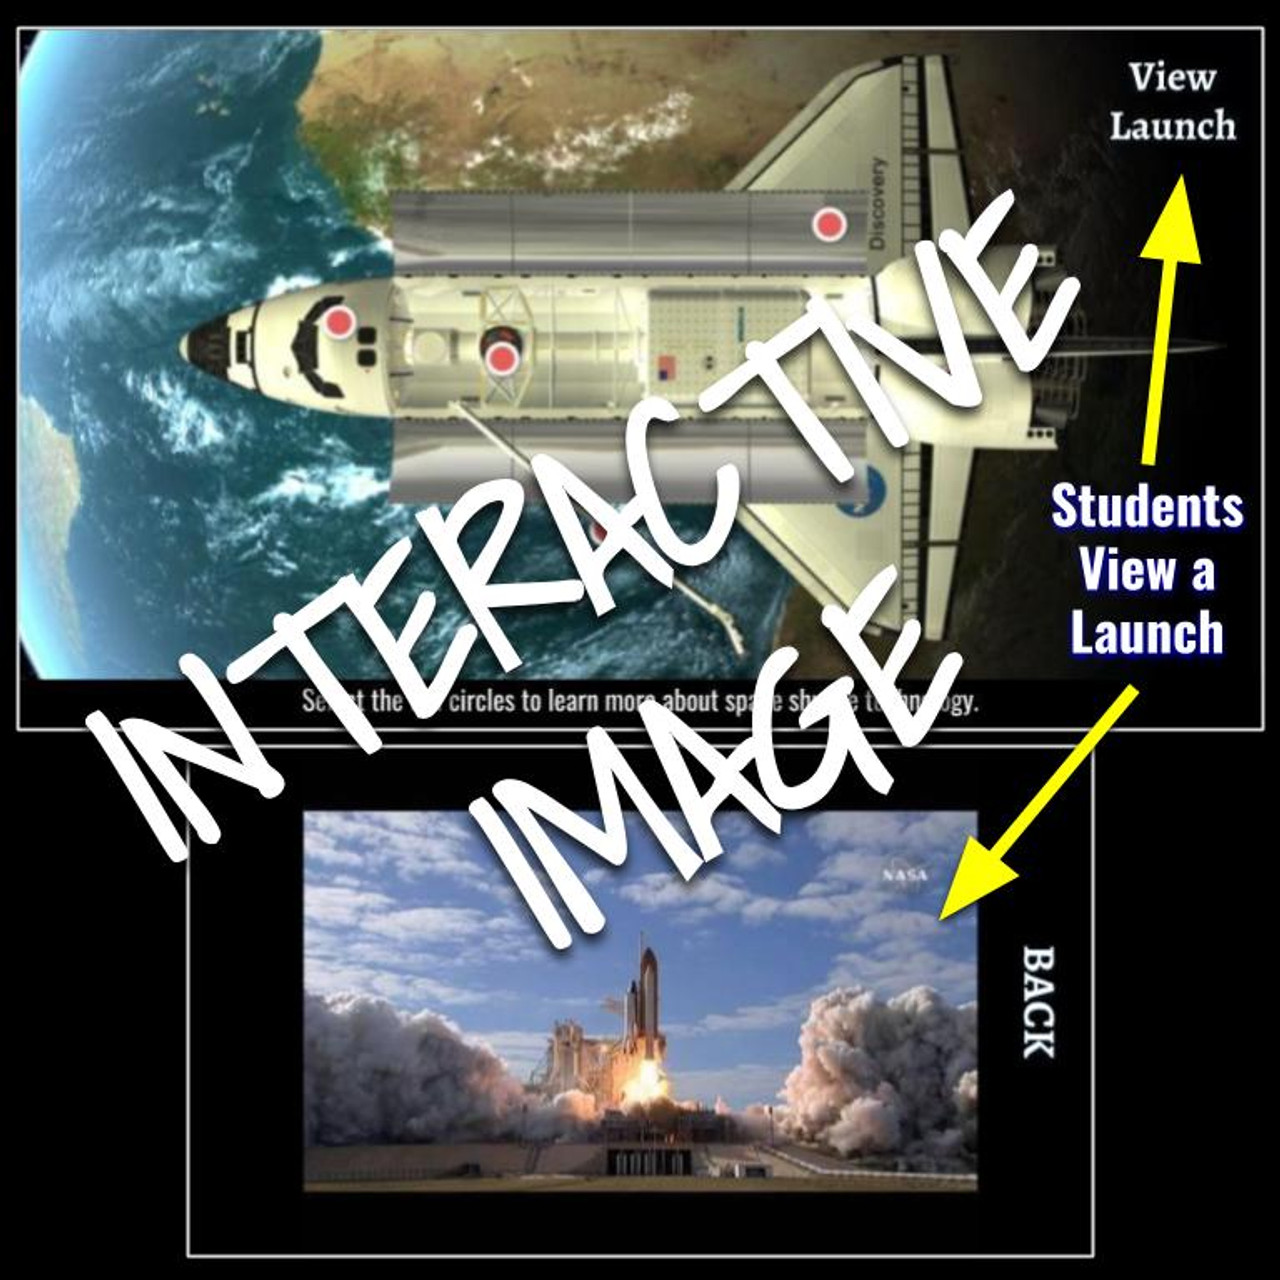 Interactive Image: Space Shuttle Science